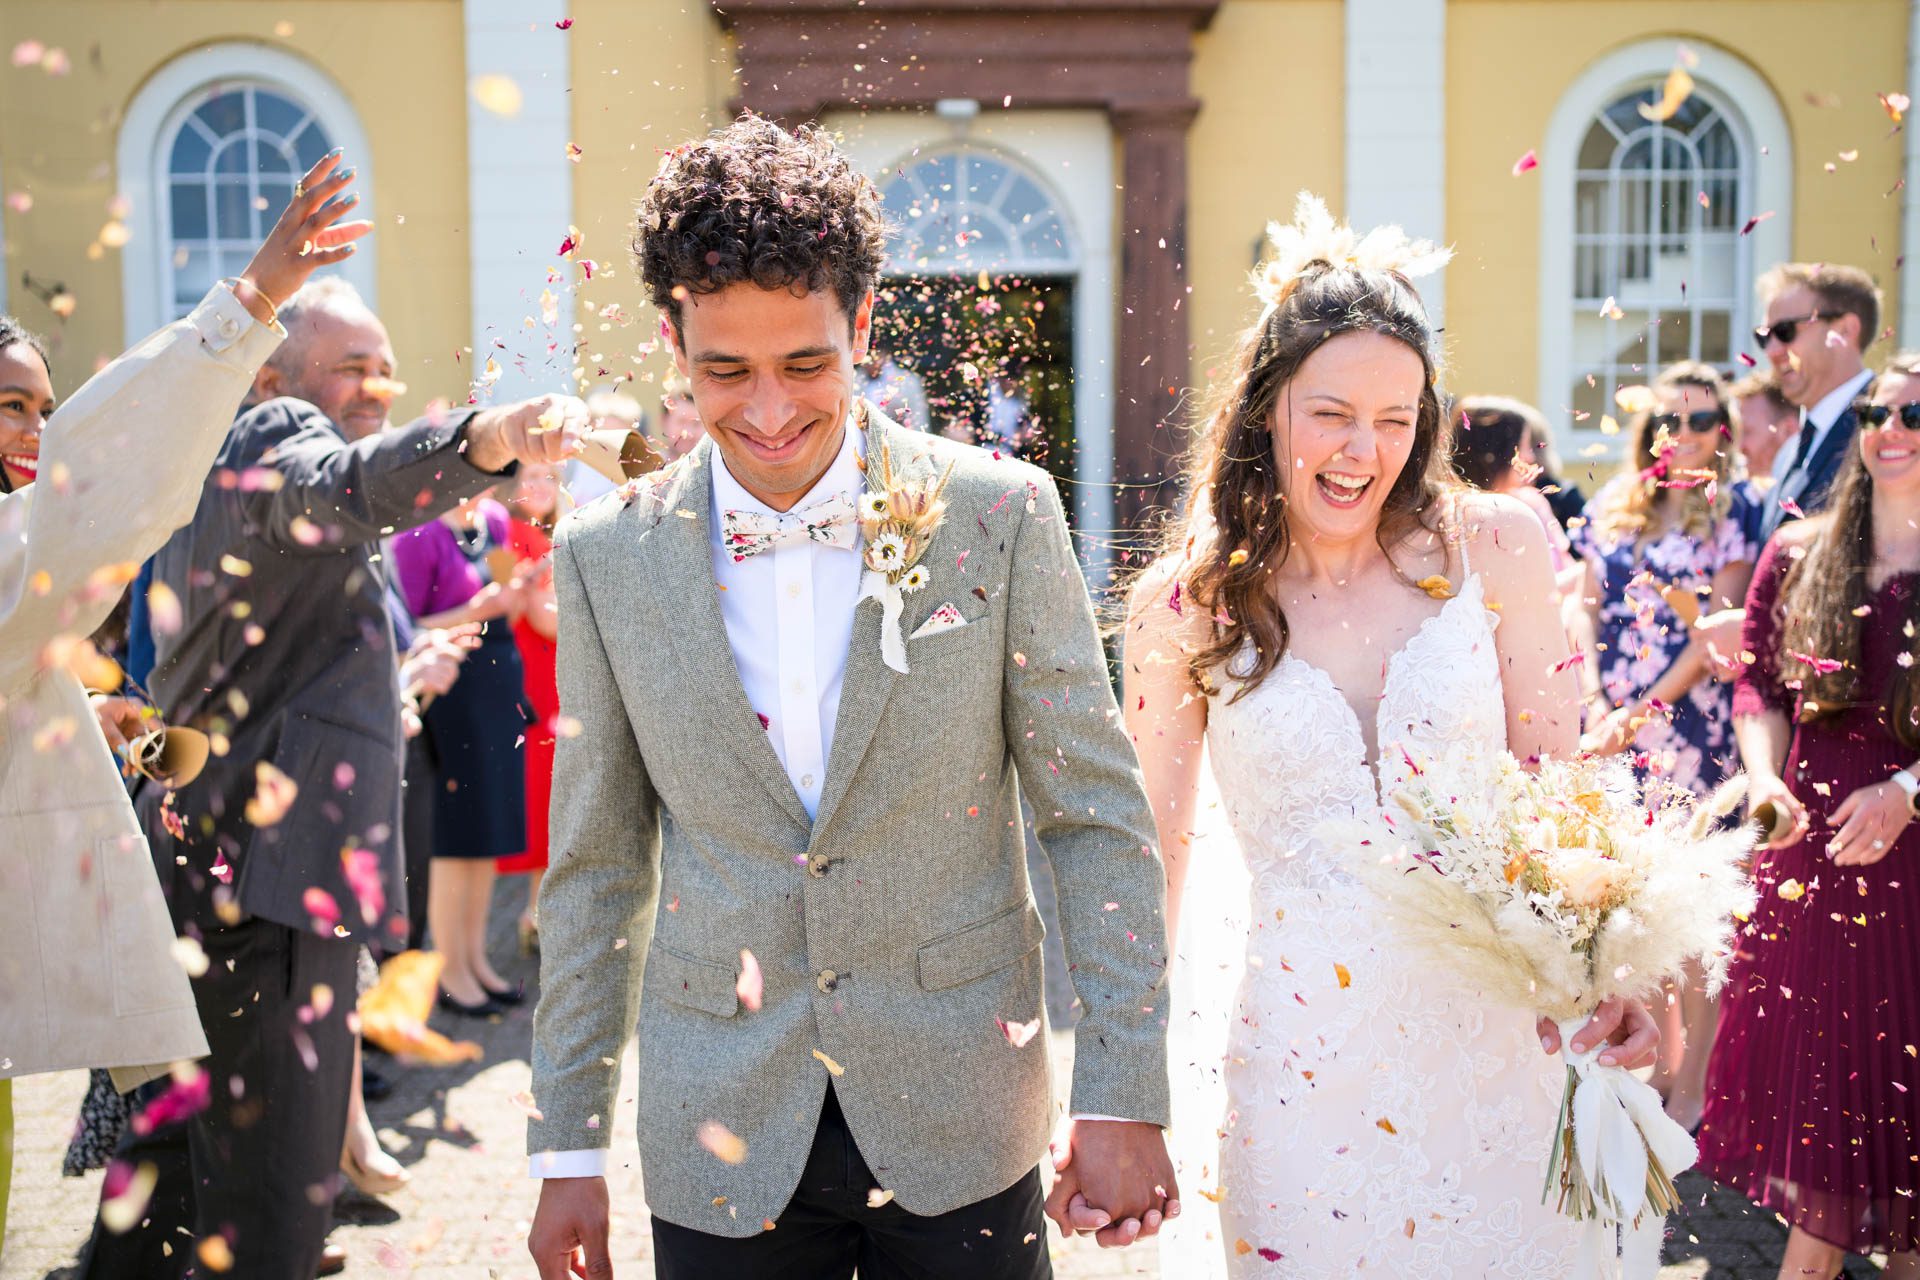 Cockermouth Town Hall Wedding - confetti being thrown at the bride and groom